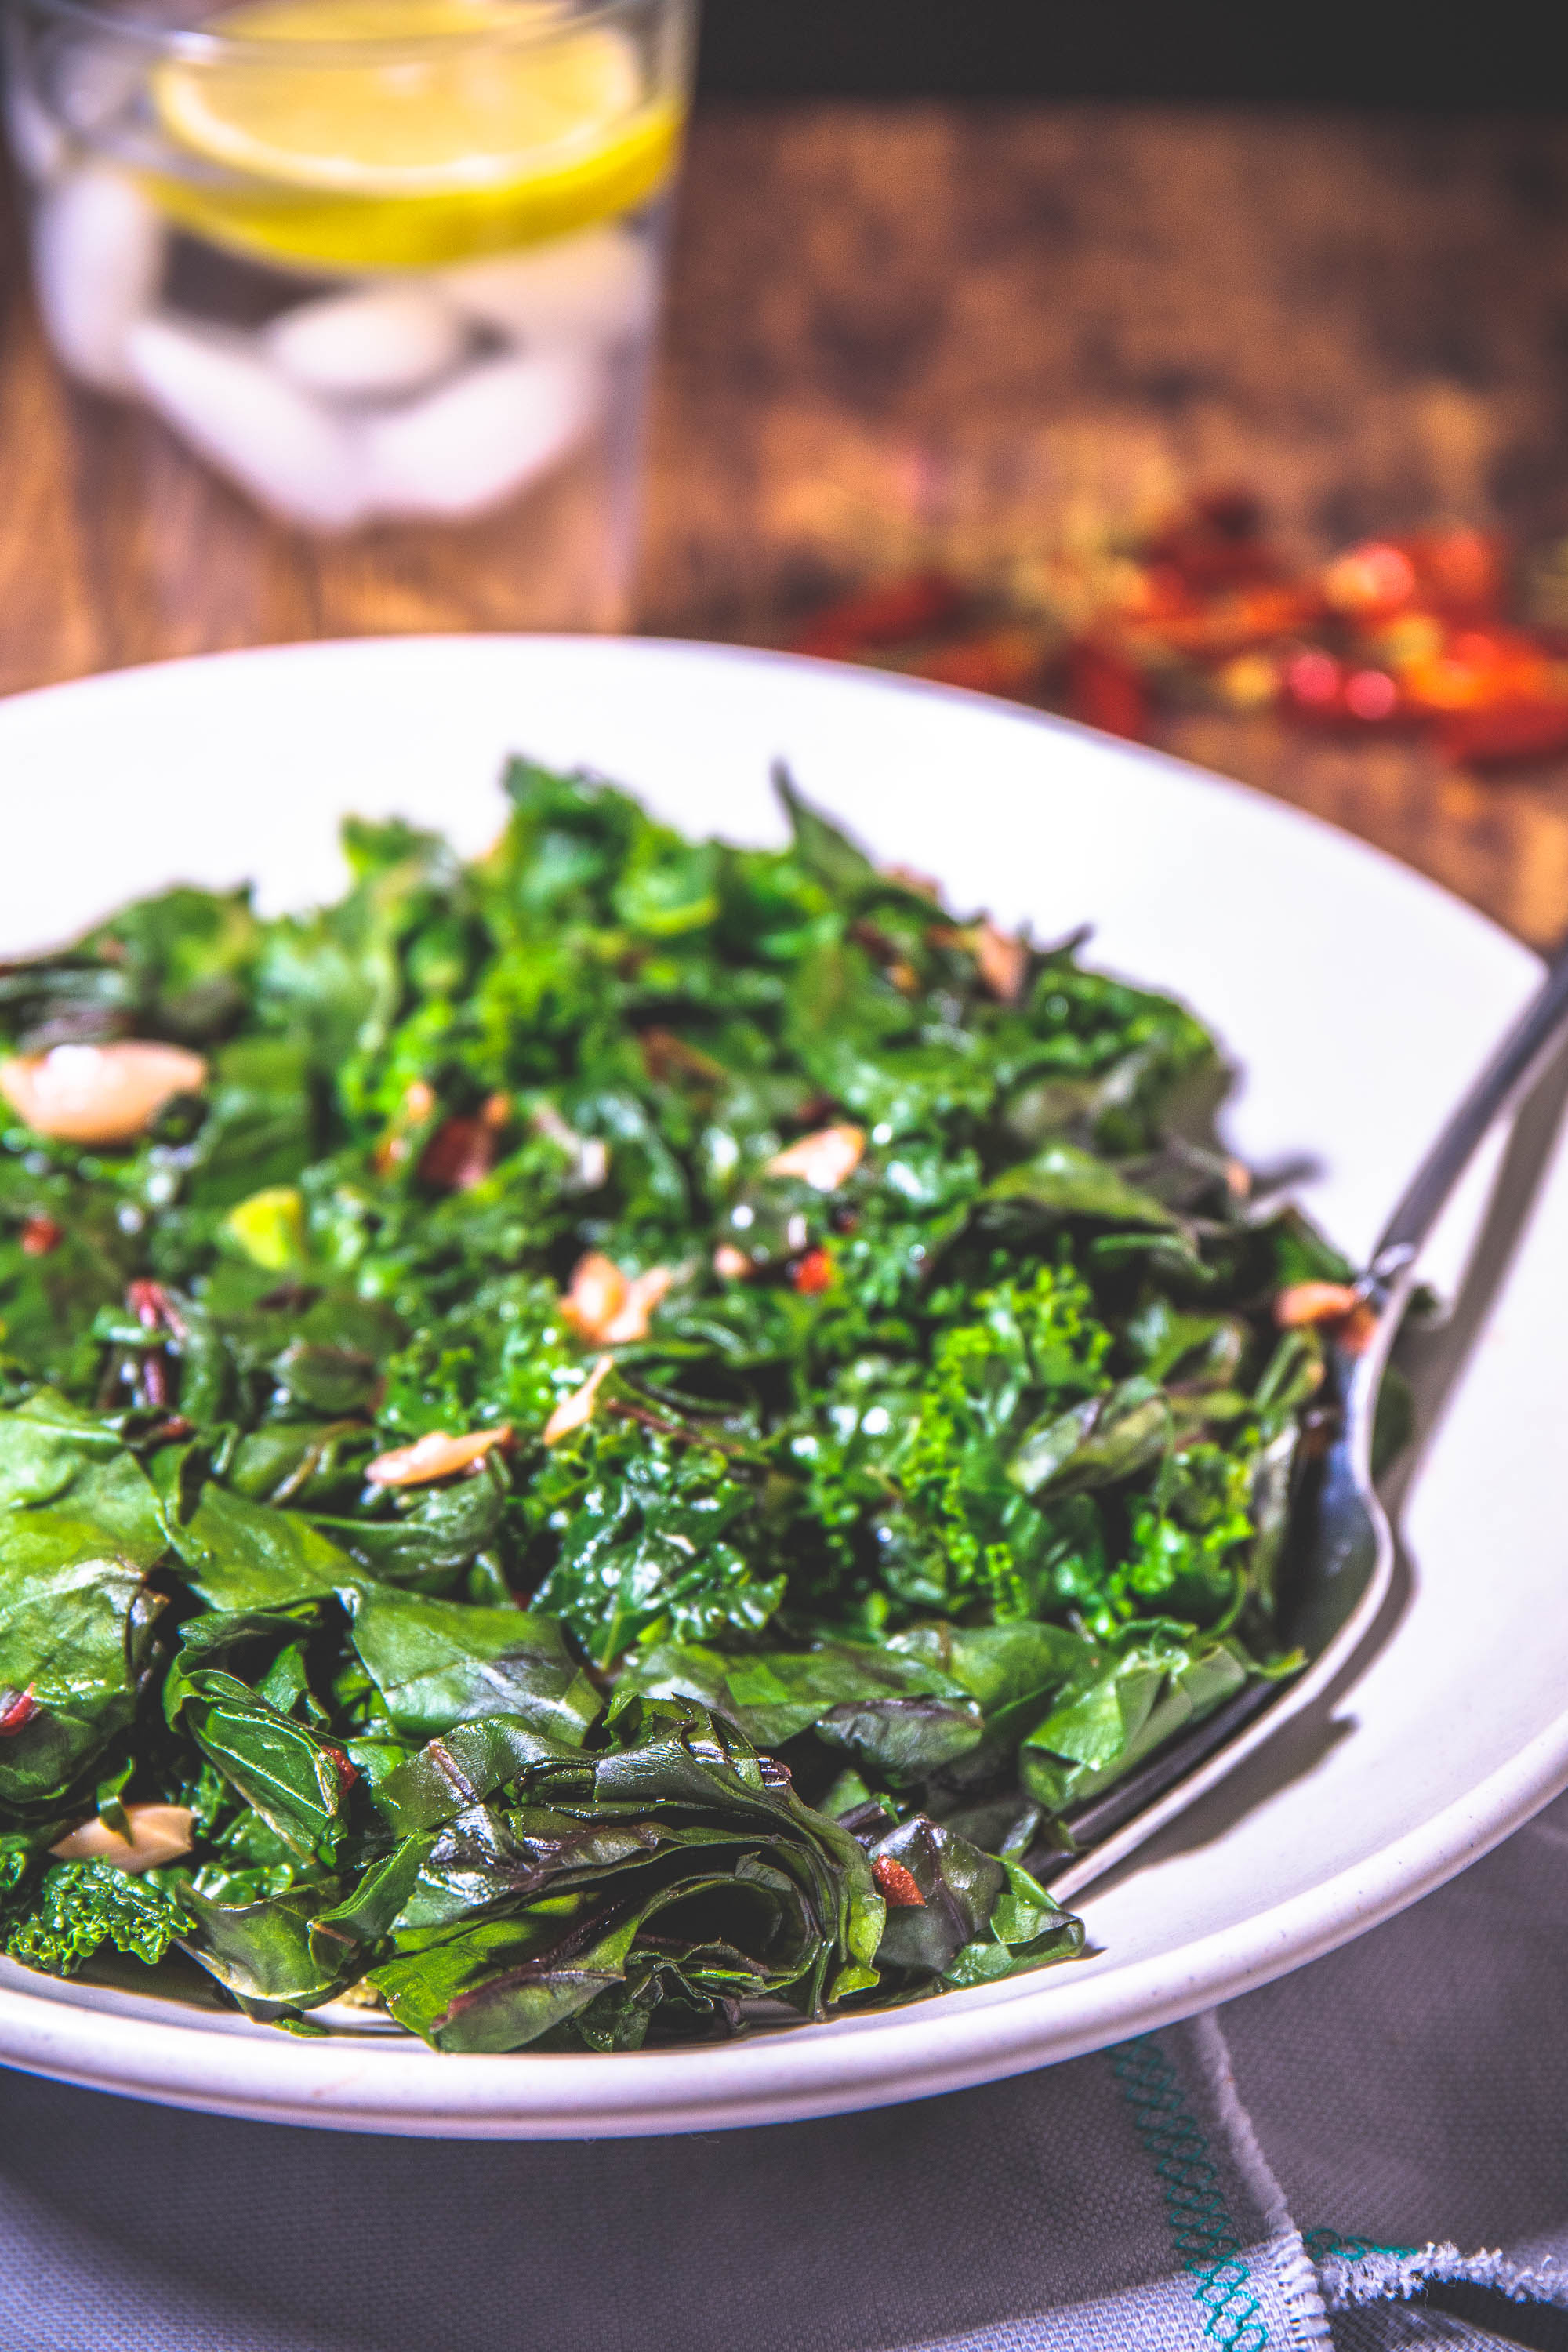 Kale, Spinach, Collards, Chard, and More: 14 Delicious Oil-Free Vegan